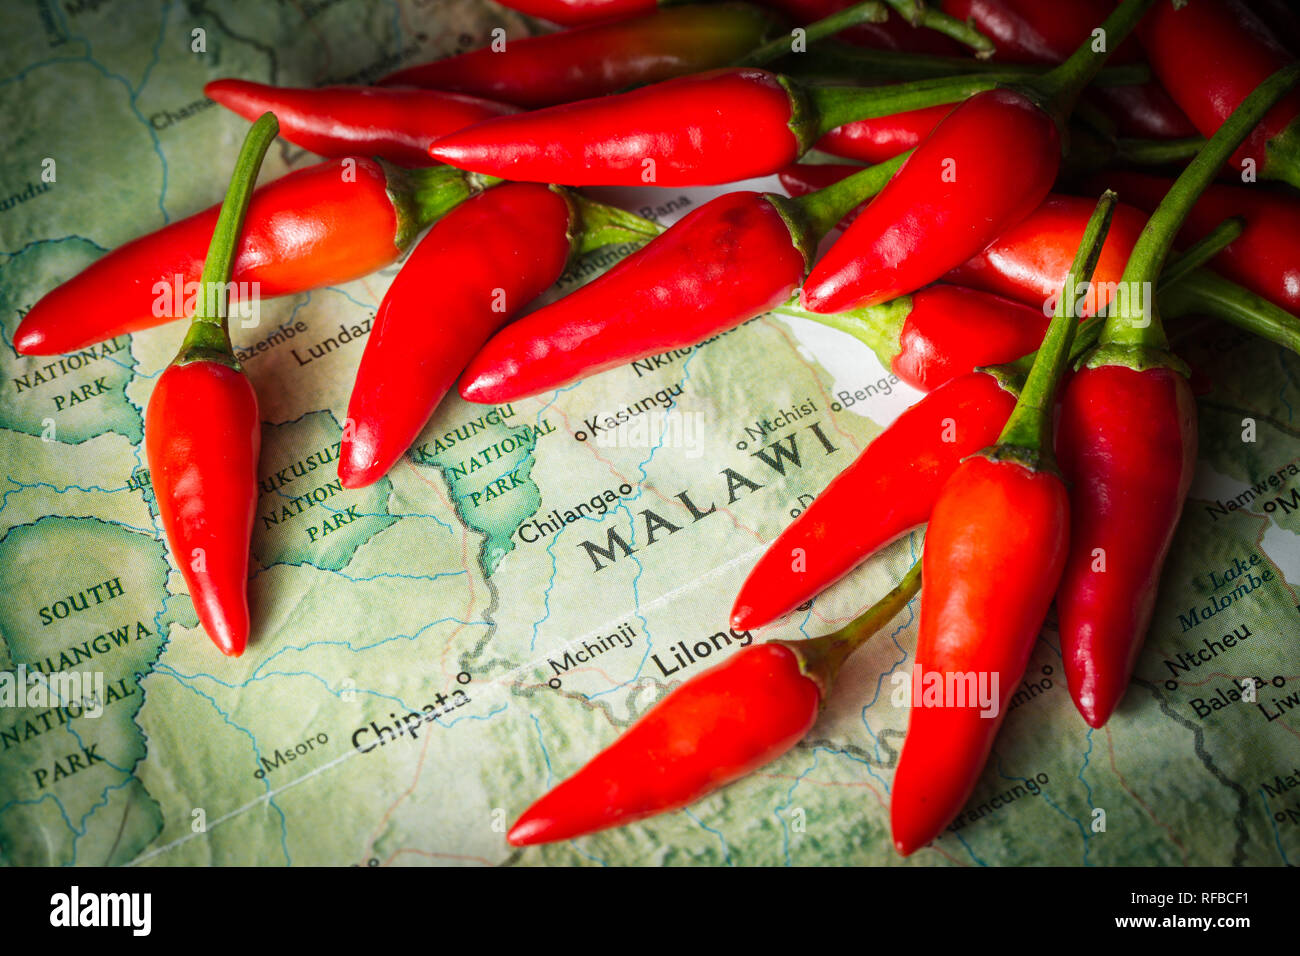 Bird's eye chili, Capsicum annuum, also known as piri piri is a common element in cuisine from Malawi. Stock Photo